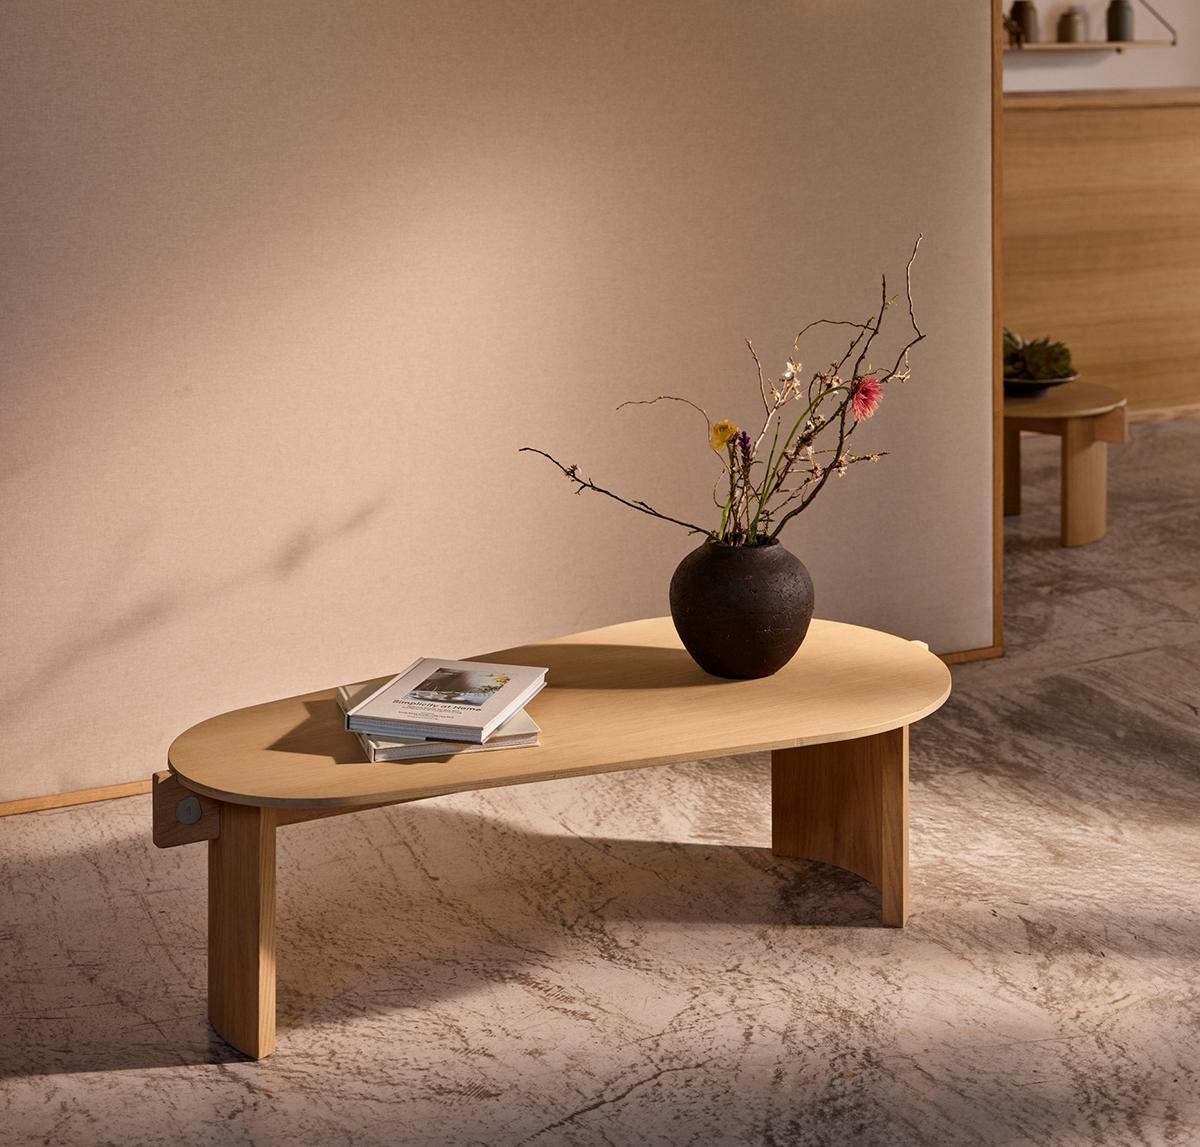 Flow Coffee Table Medium with rounded edges, contours its asymmetrical elliptical form by curved two legs. The linear skeleton joins into the legs to create a well-proportioned base for the table top.

Crafted from oak wood, the low piece awakens a